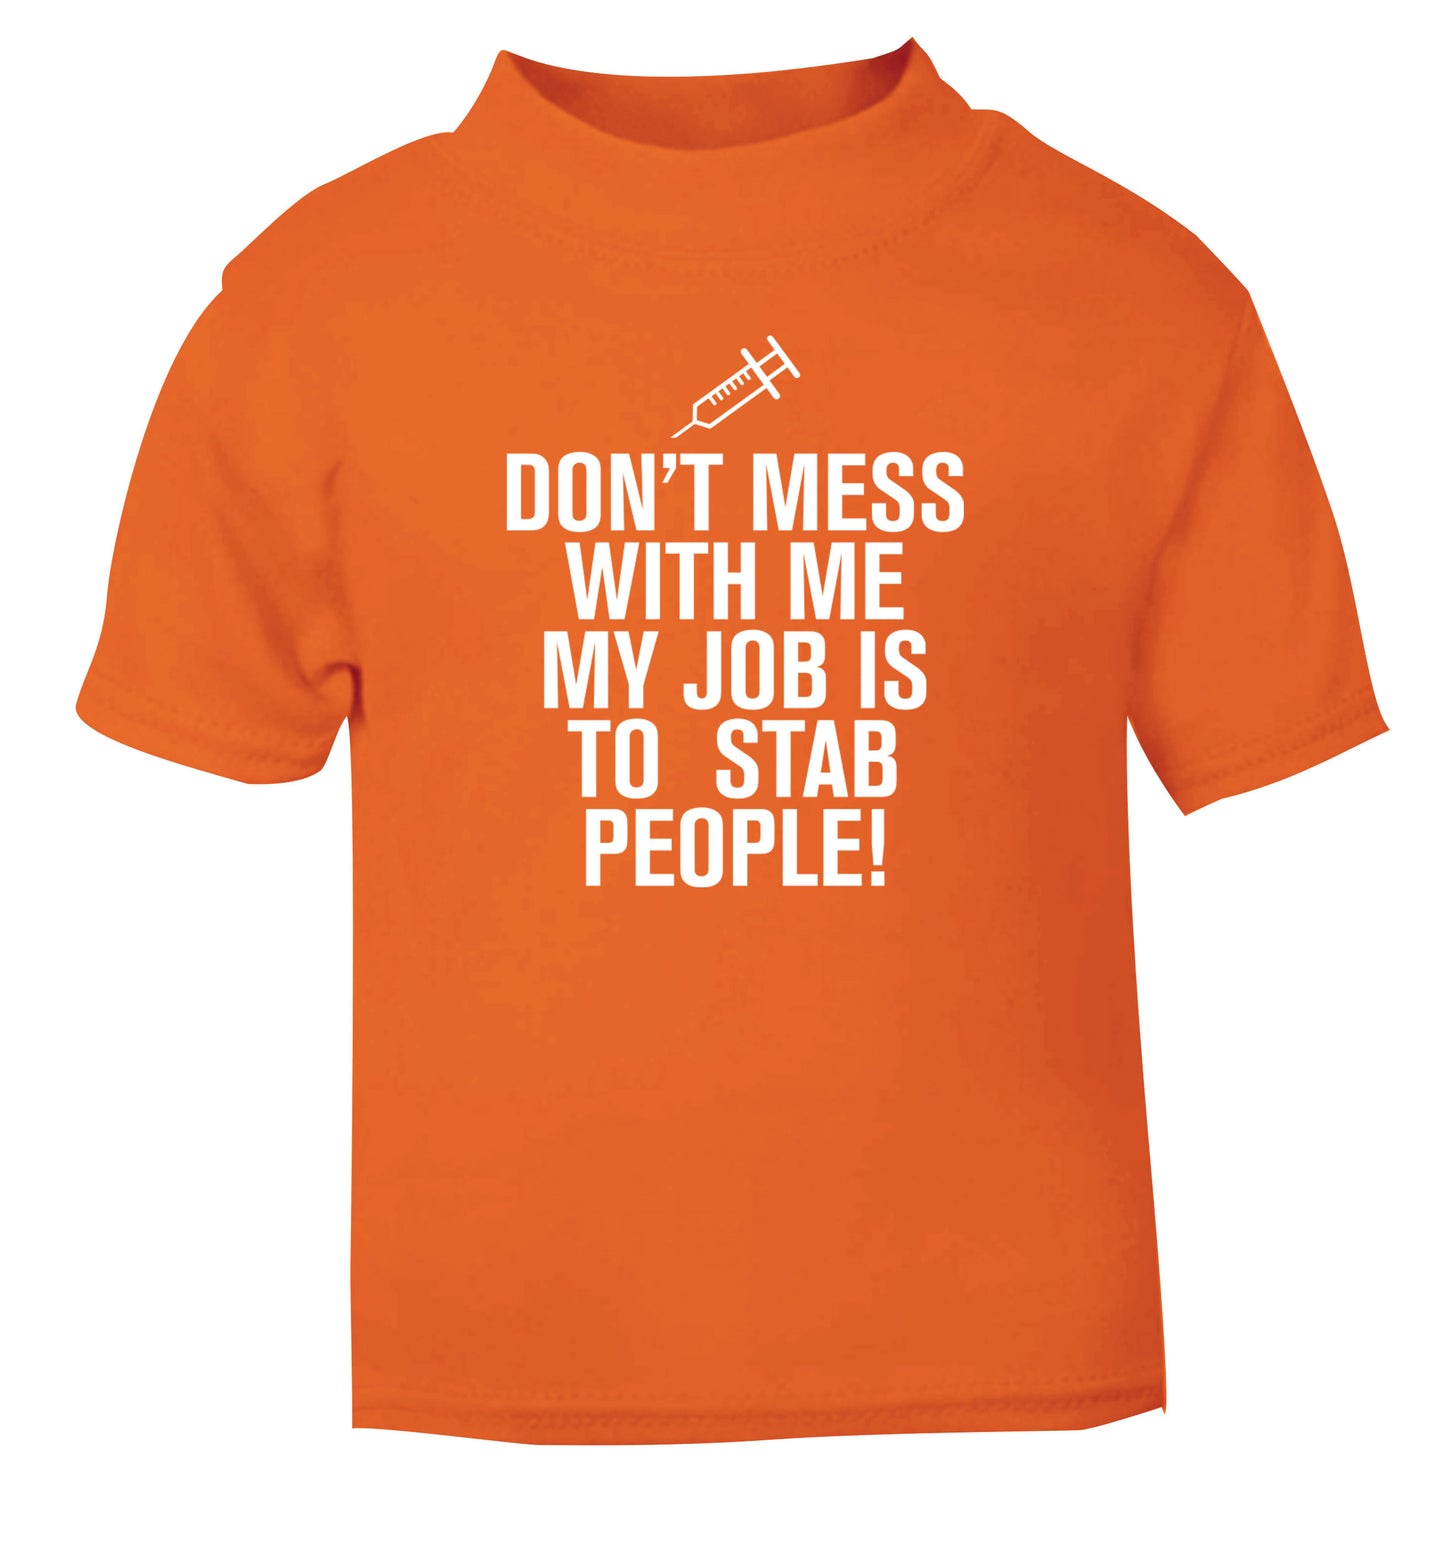 Don't mess with me my job is to stab people! orange Baby Toddler Tshirt 2 Years